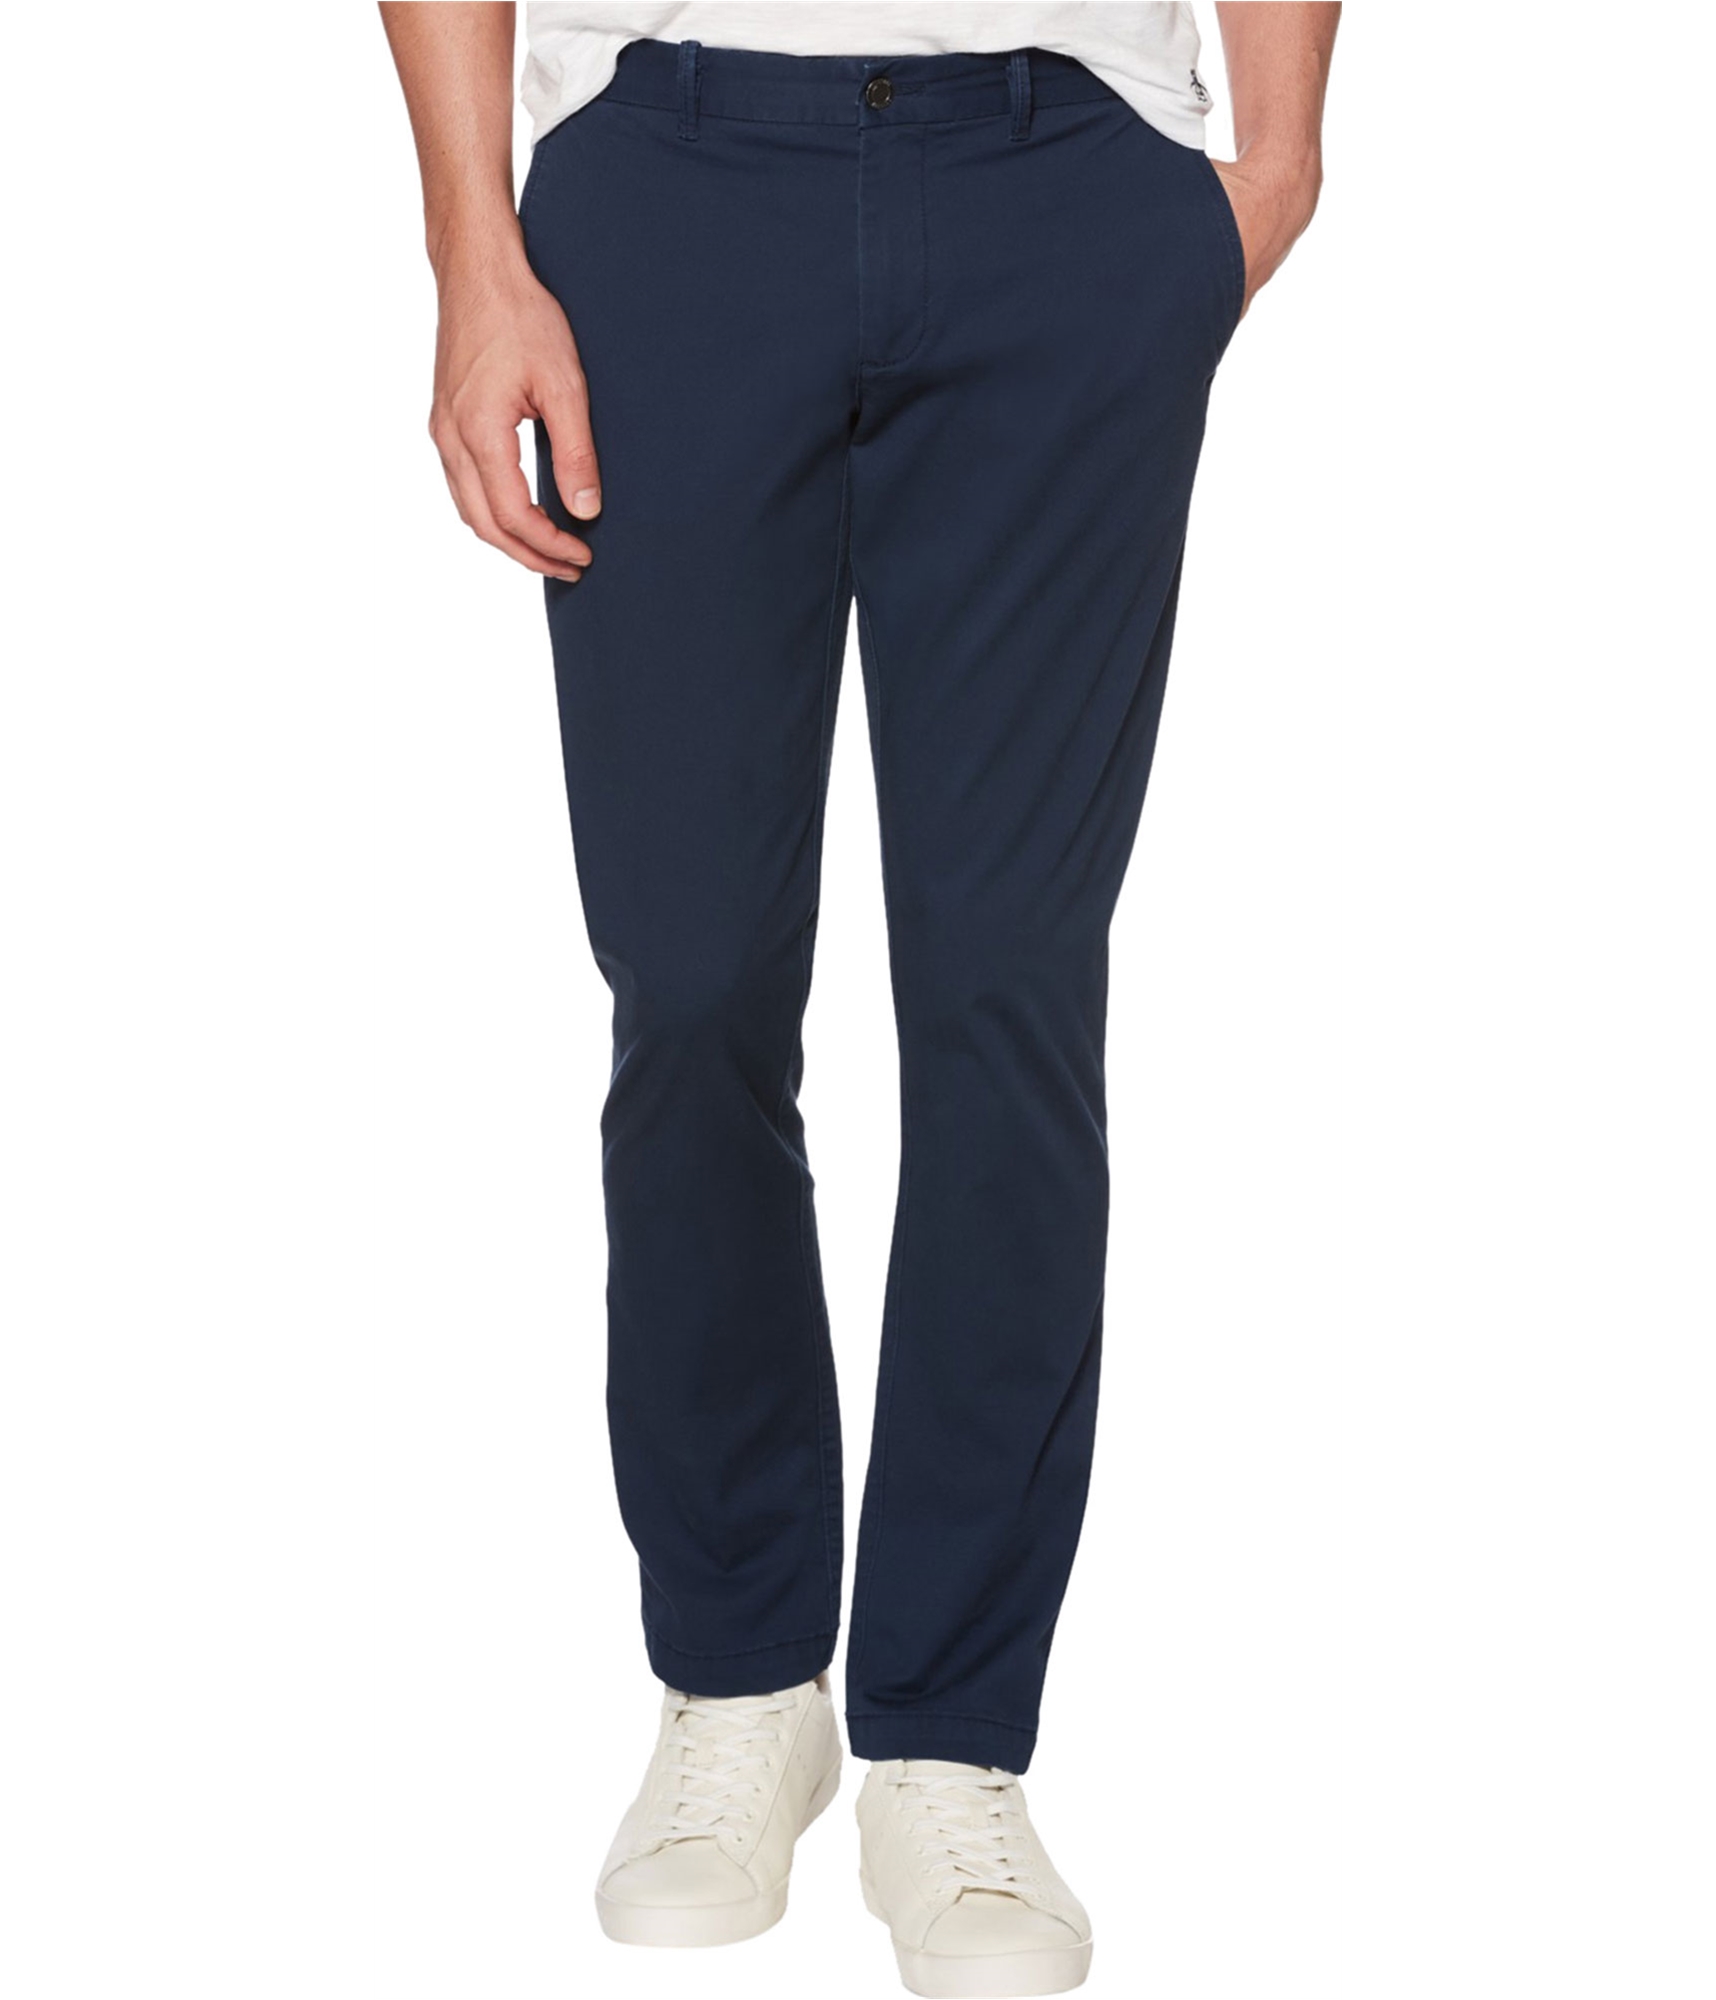 What To Wear: The Best Men's Stretch Pants Online - Tagsweekly